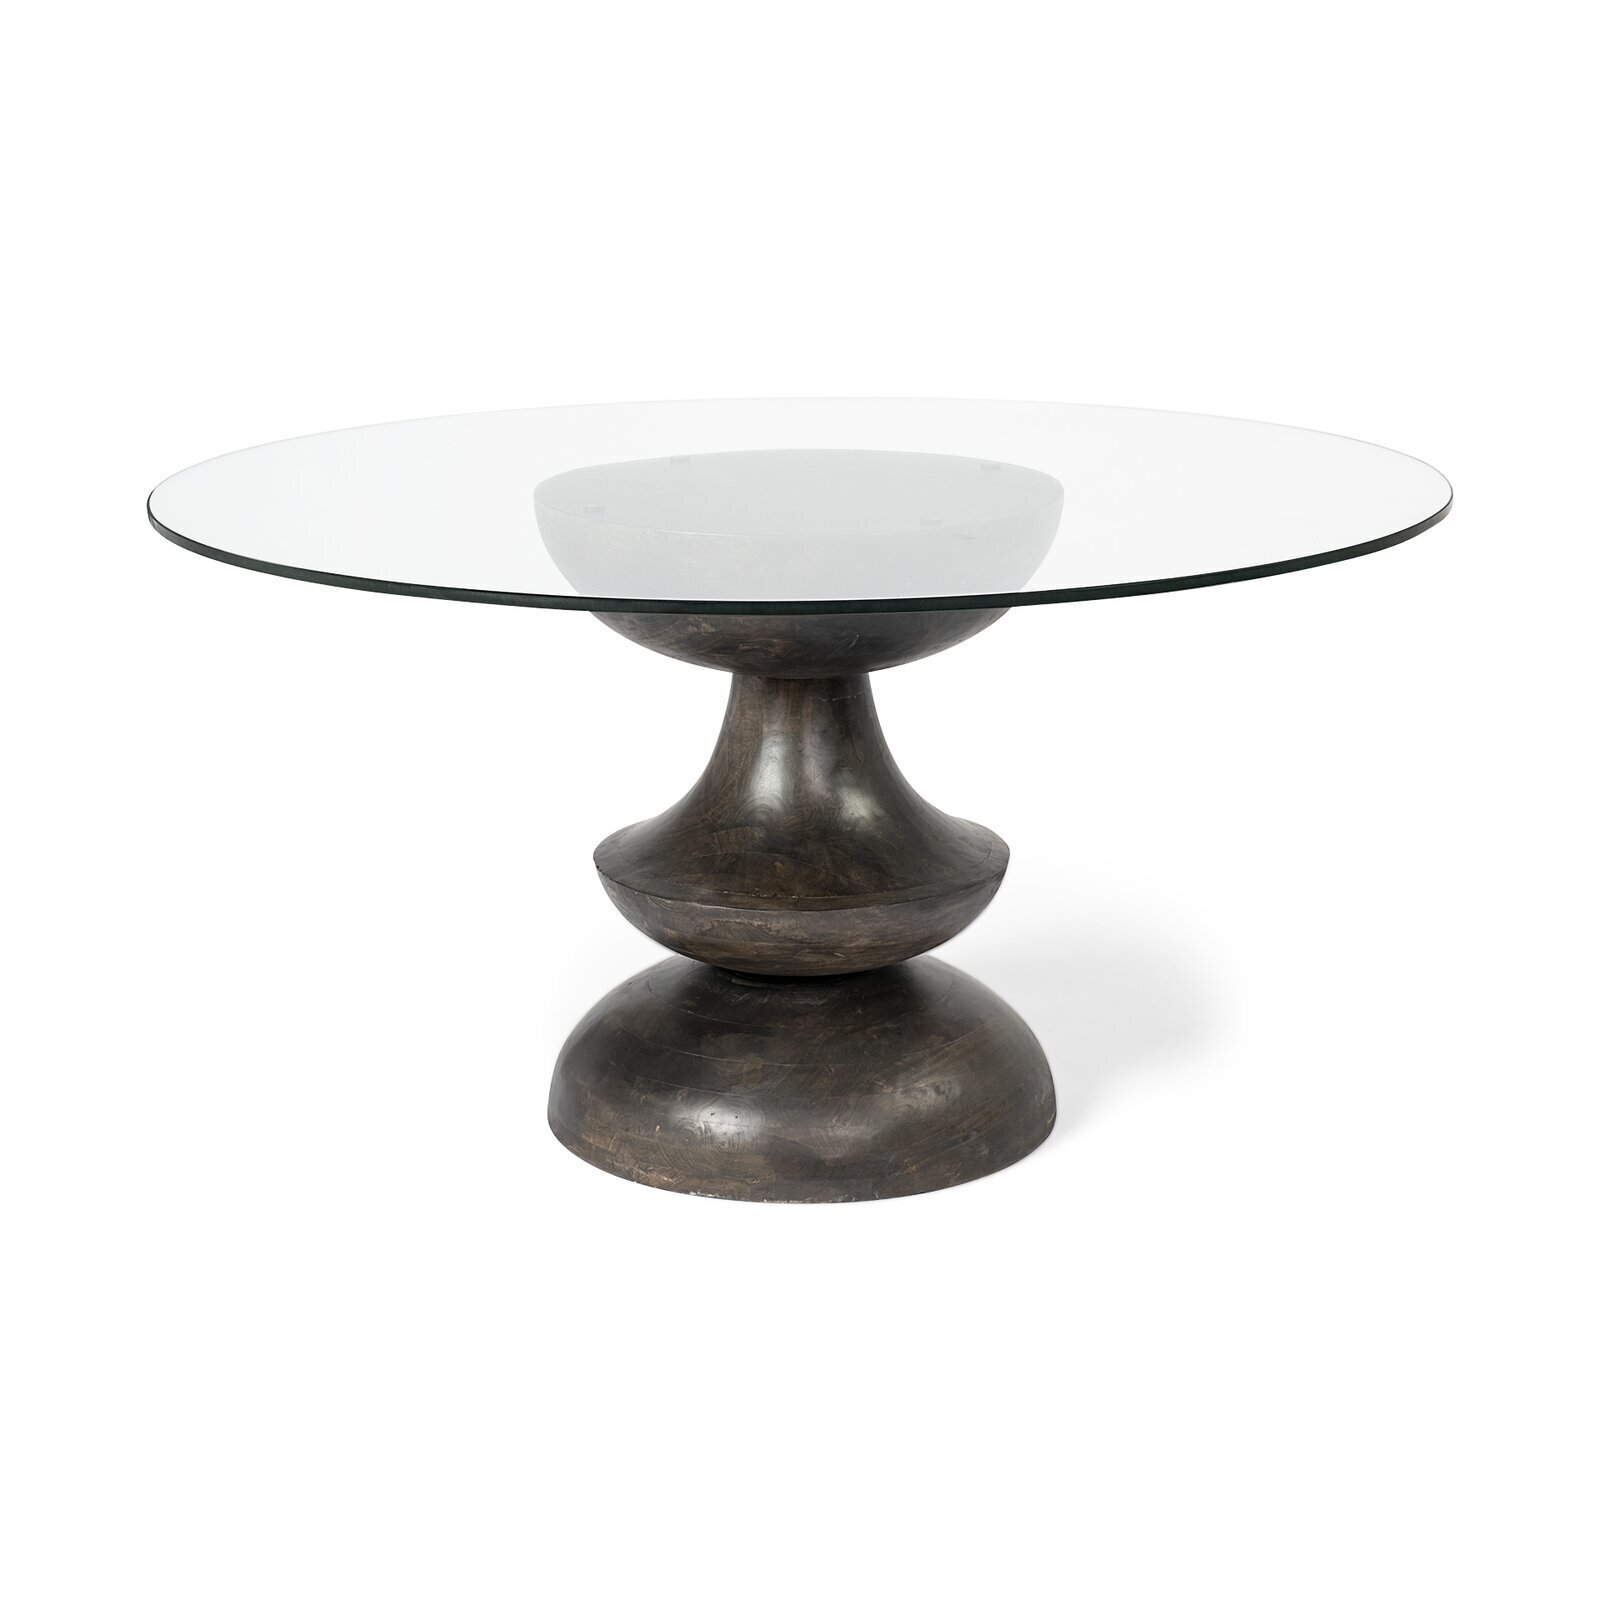 Pedestal Oval Glass Dining Table 